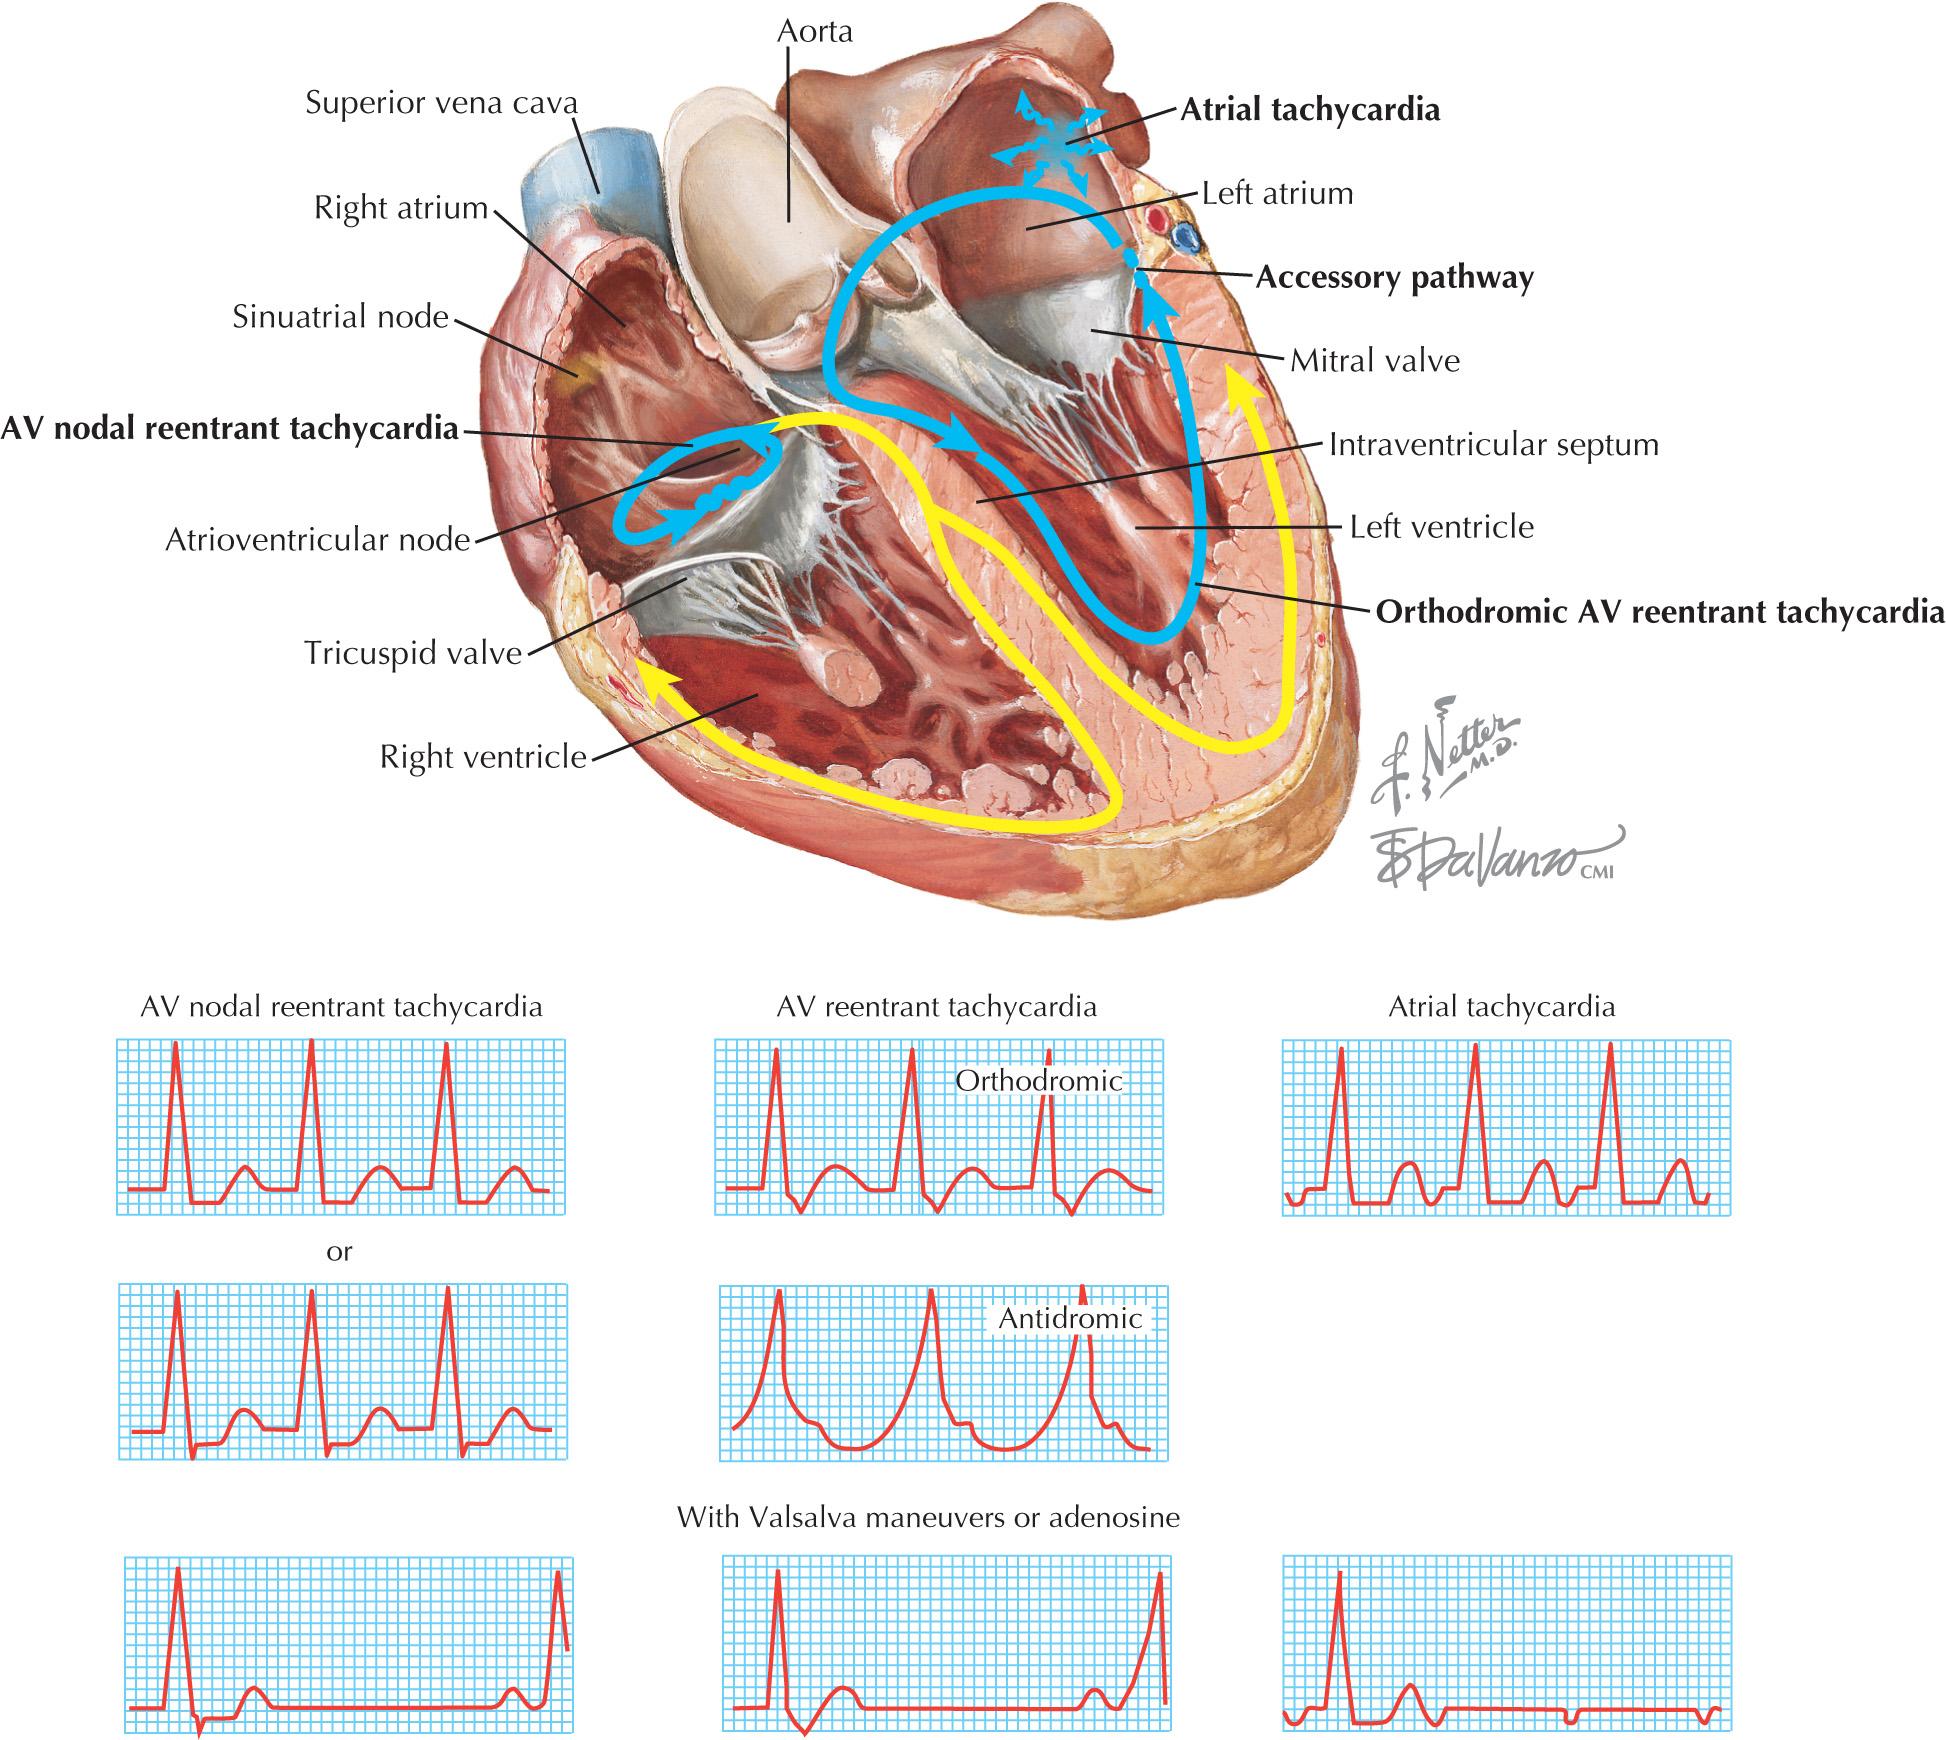 FIG 37.3, Typical ECG Recordings of the Most Common Forms of Supraventricular Tachycardia.